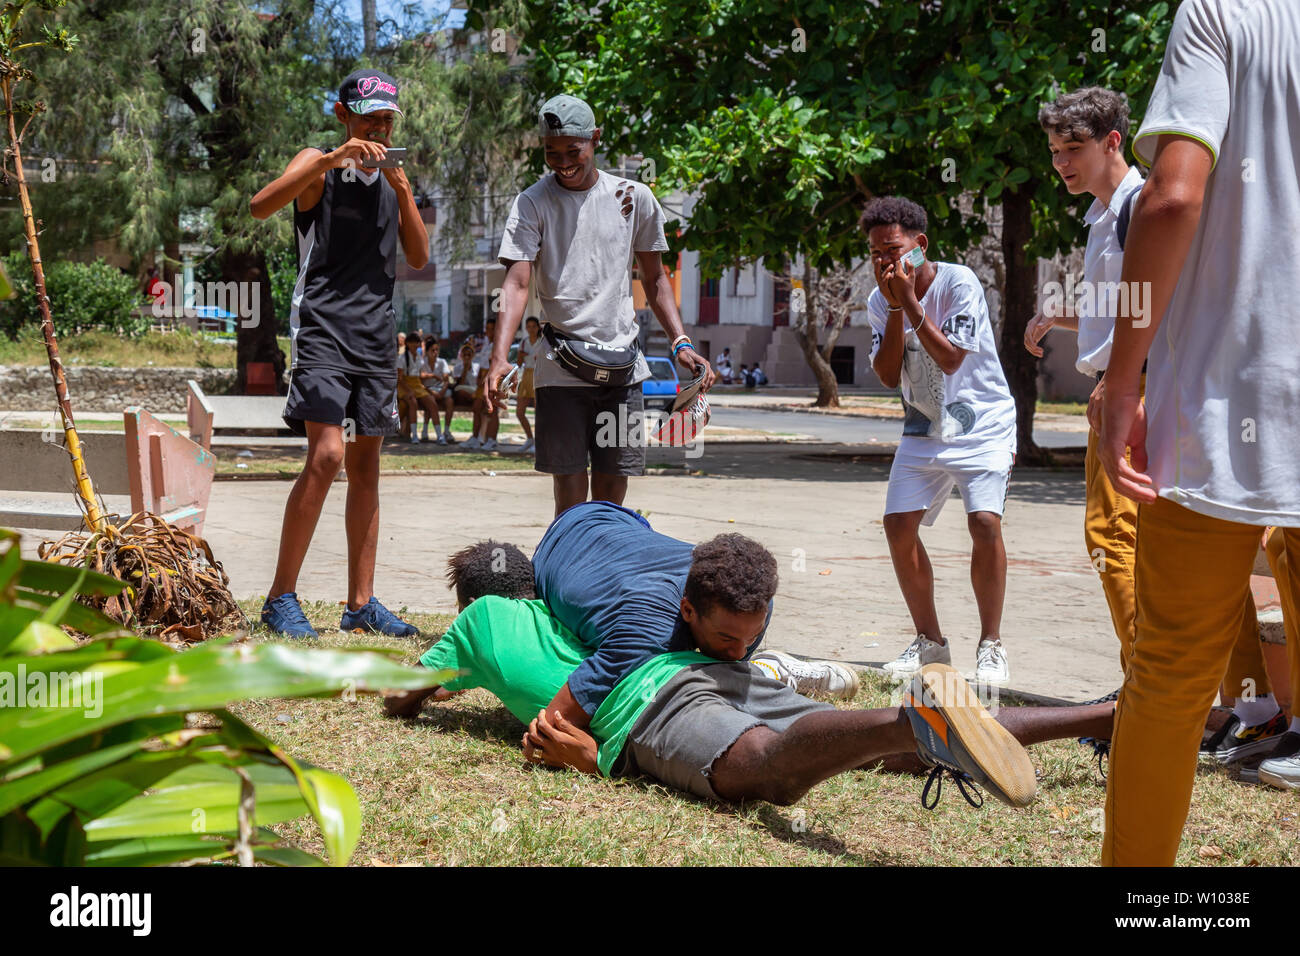 Havana, Cuba - May 14, 2019: Young Teenagers wrestling and having fun in a public square during a hot sunny day. Stock Photo